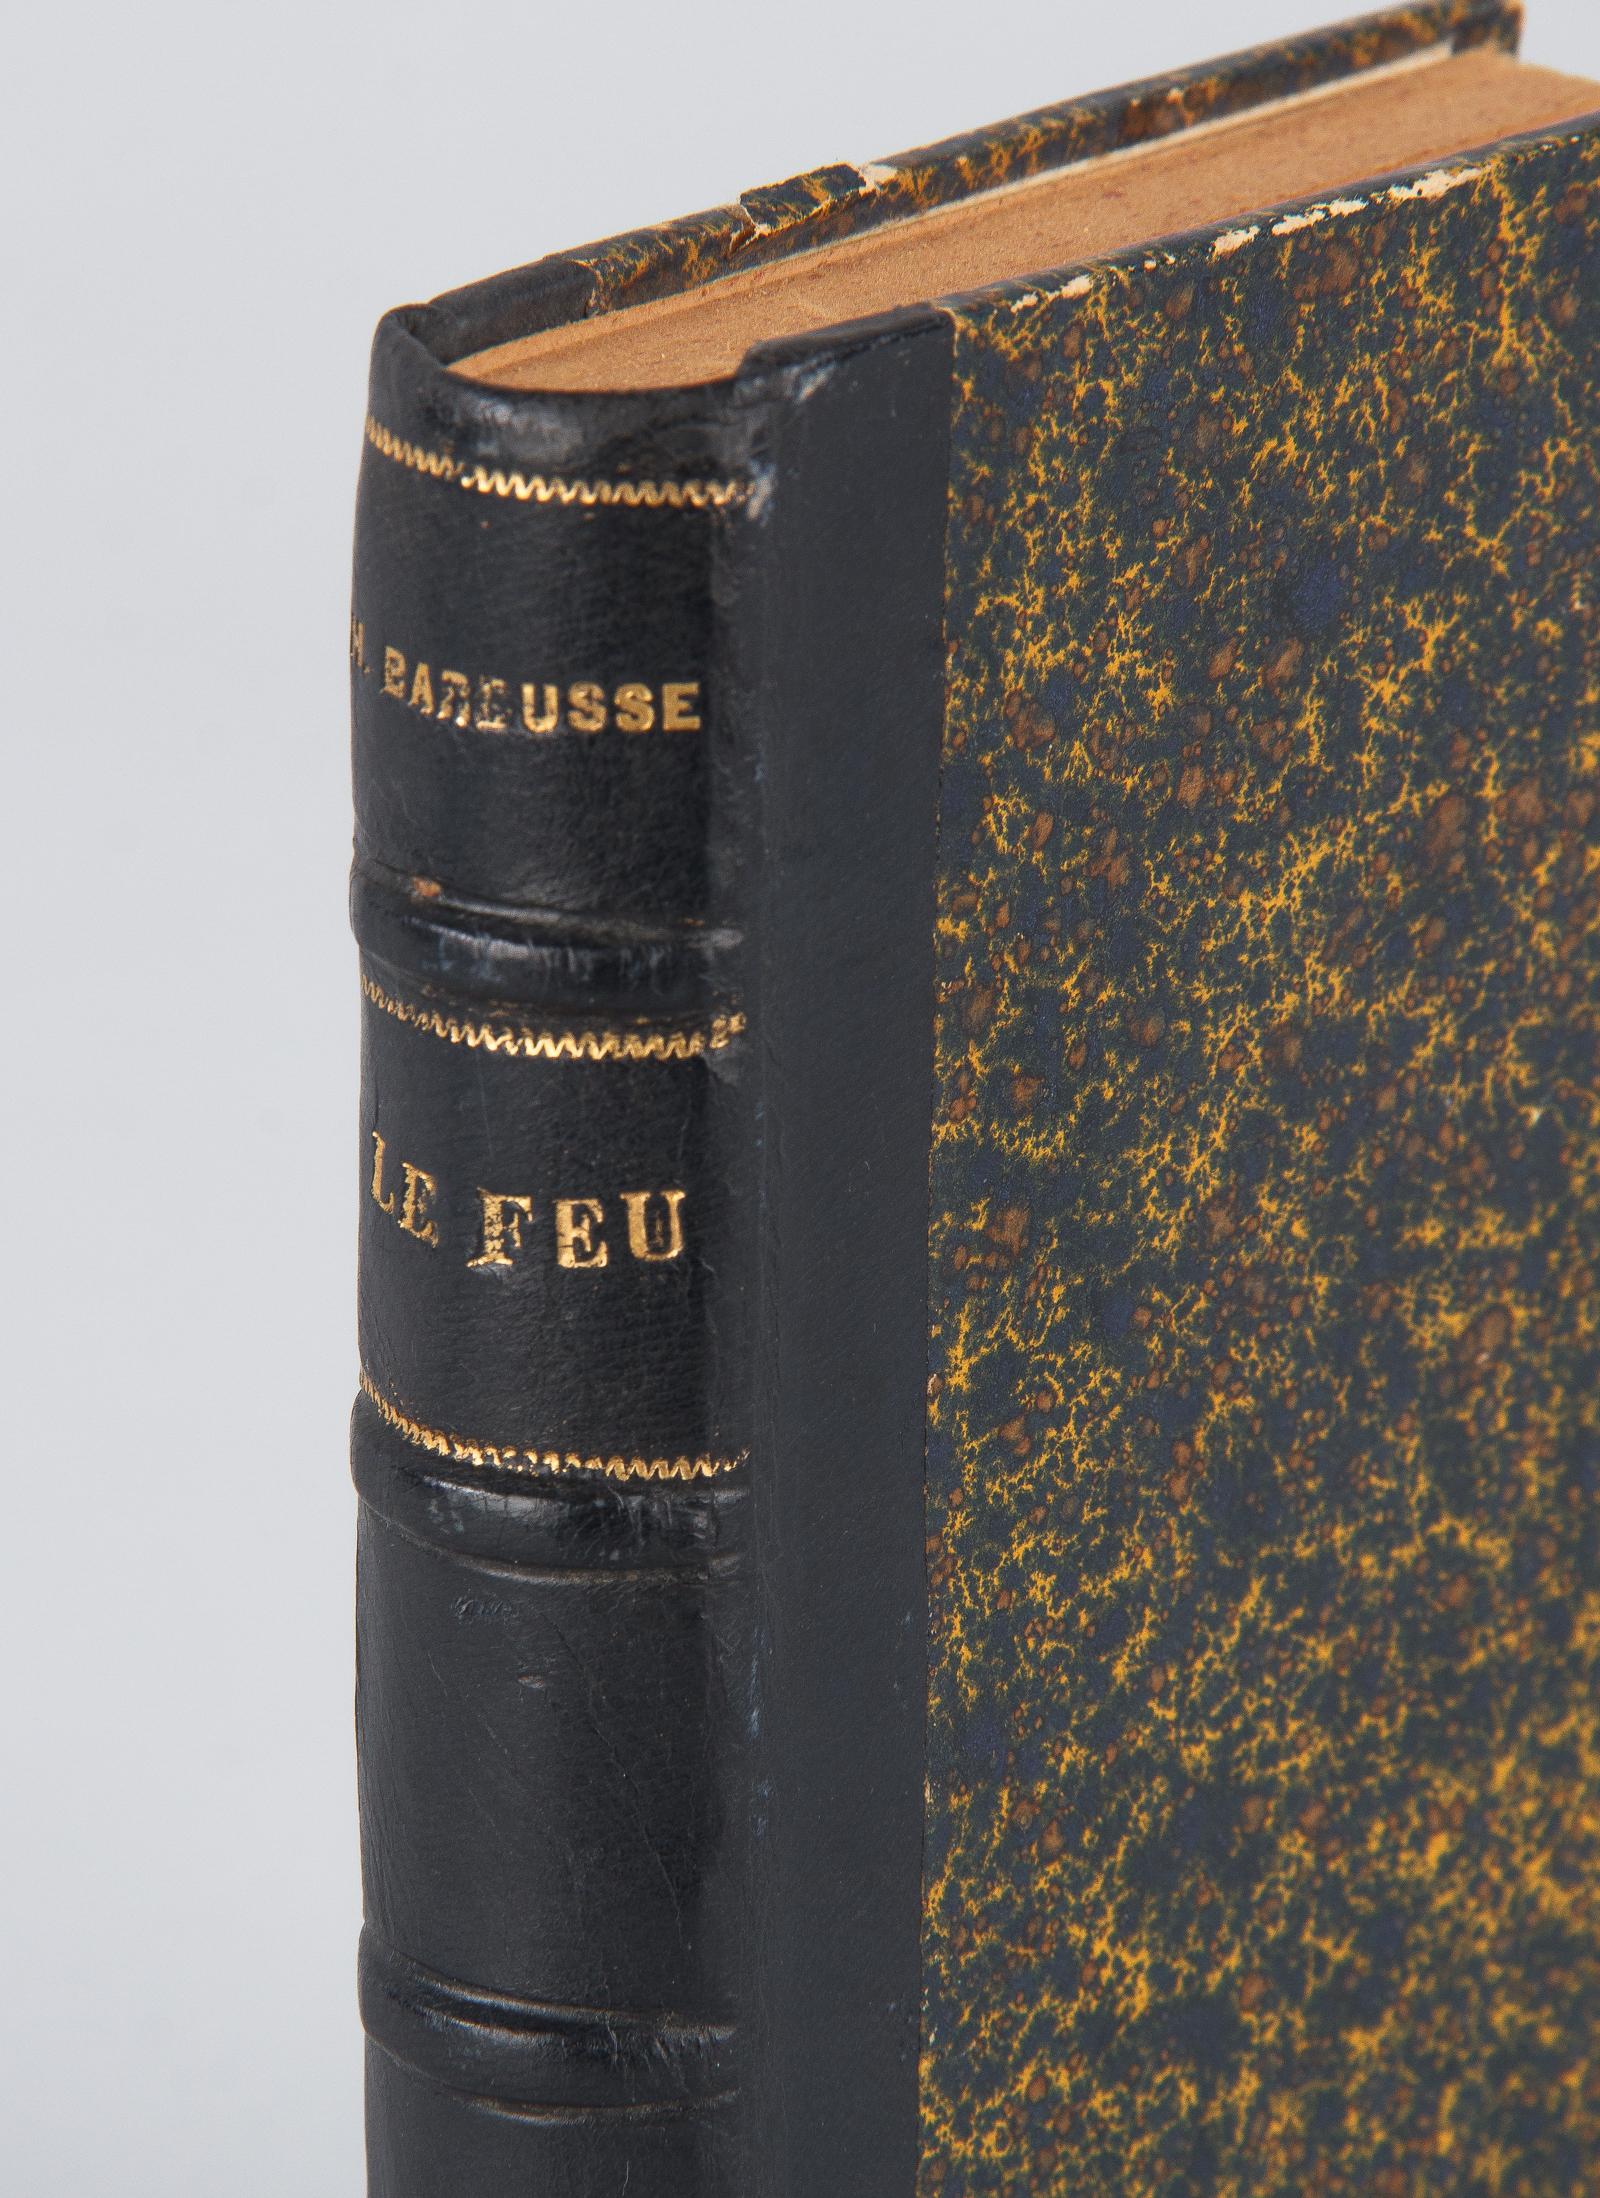 20th Century French Book, Le Feu, Journal d'une Escouade by Henri Barbusse, 1917 For Sale